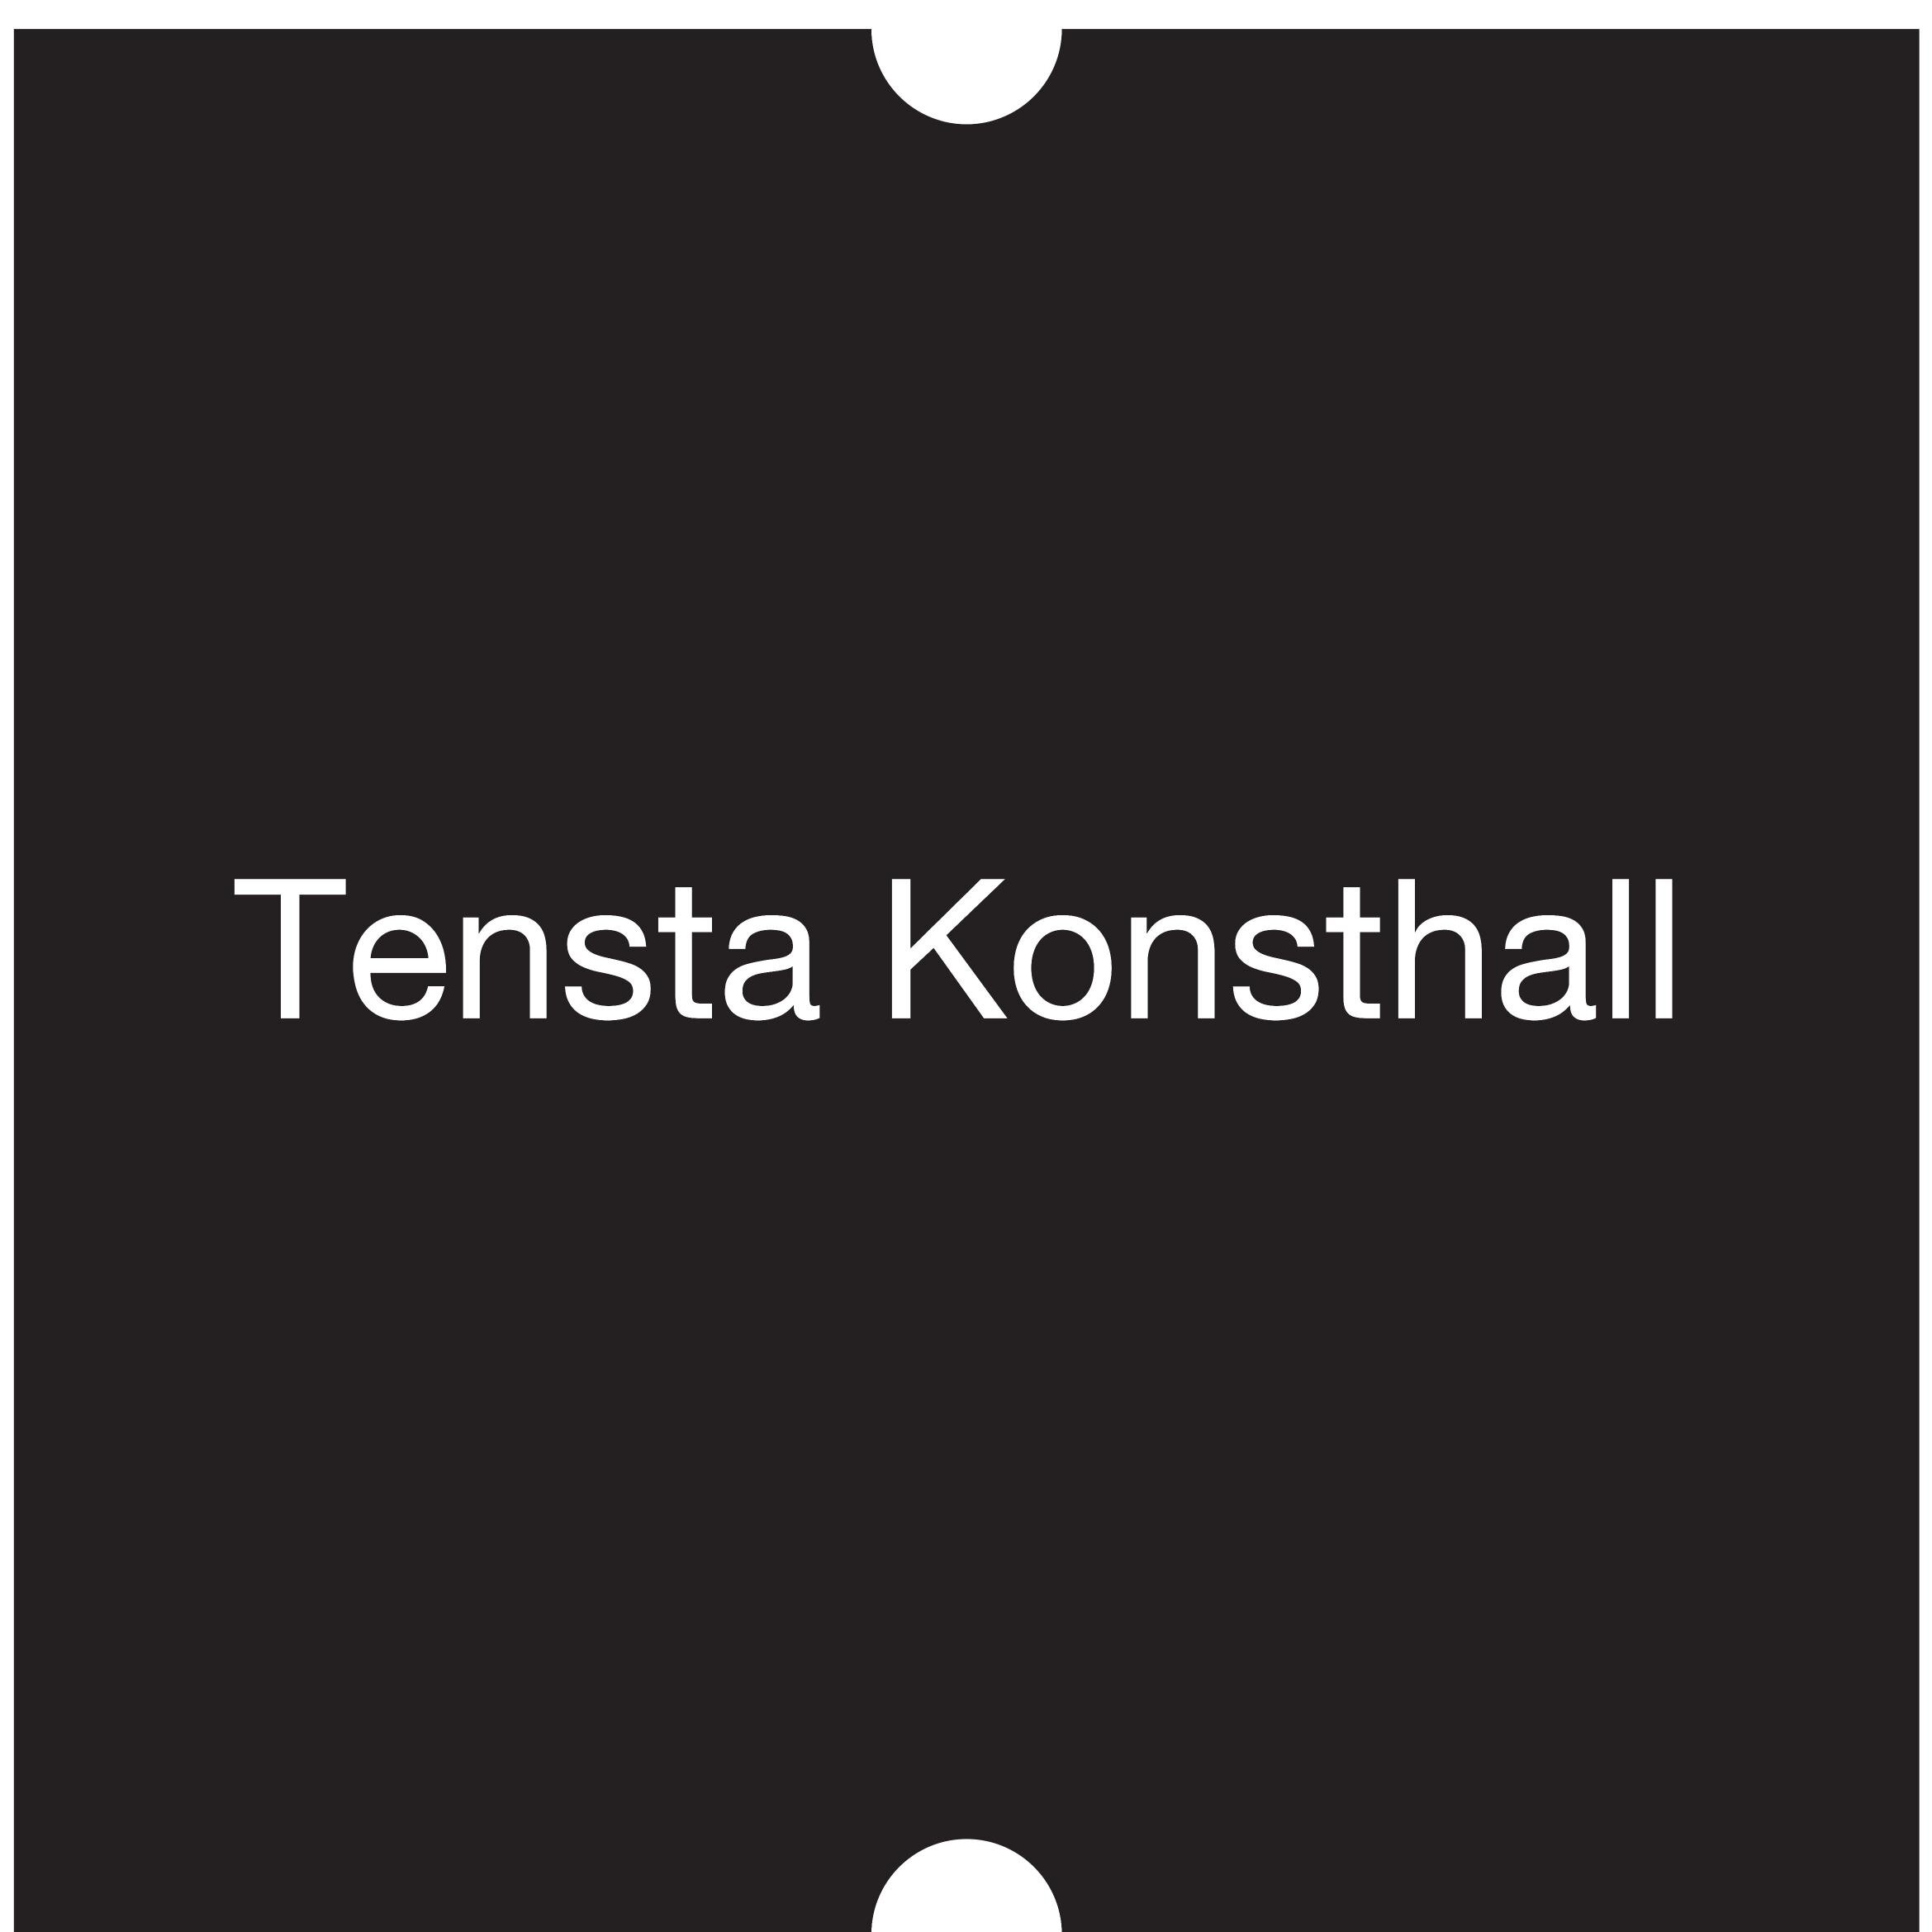 Tensta konsthall is a center for contemporary art in the Stockholm suburb of Tensta